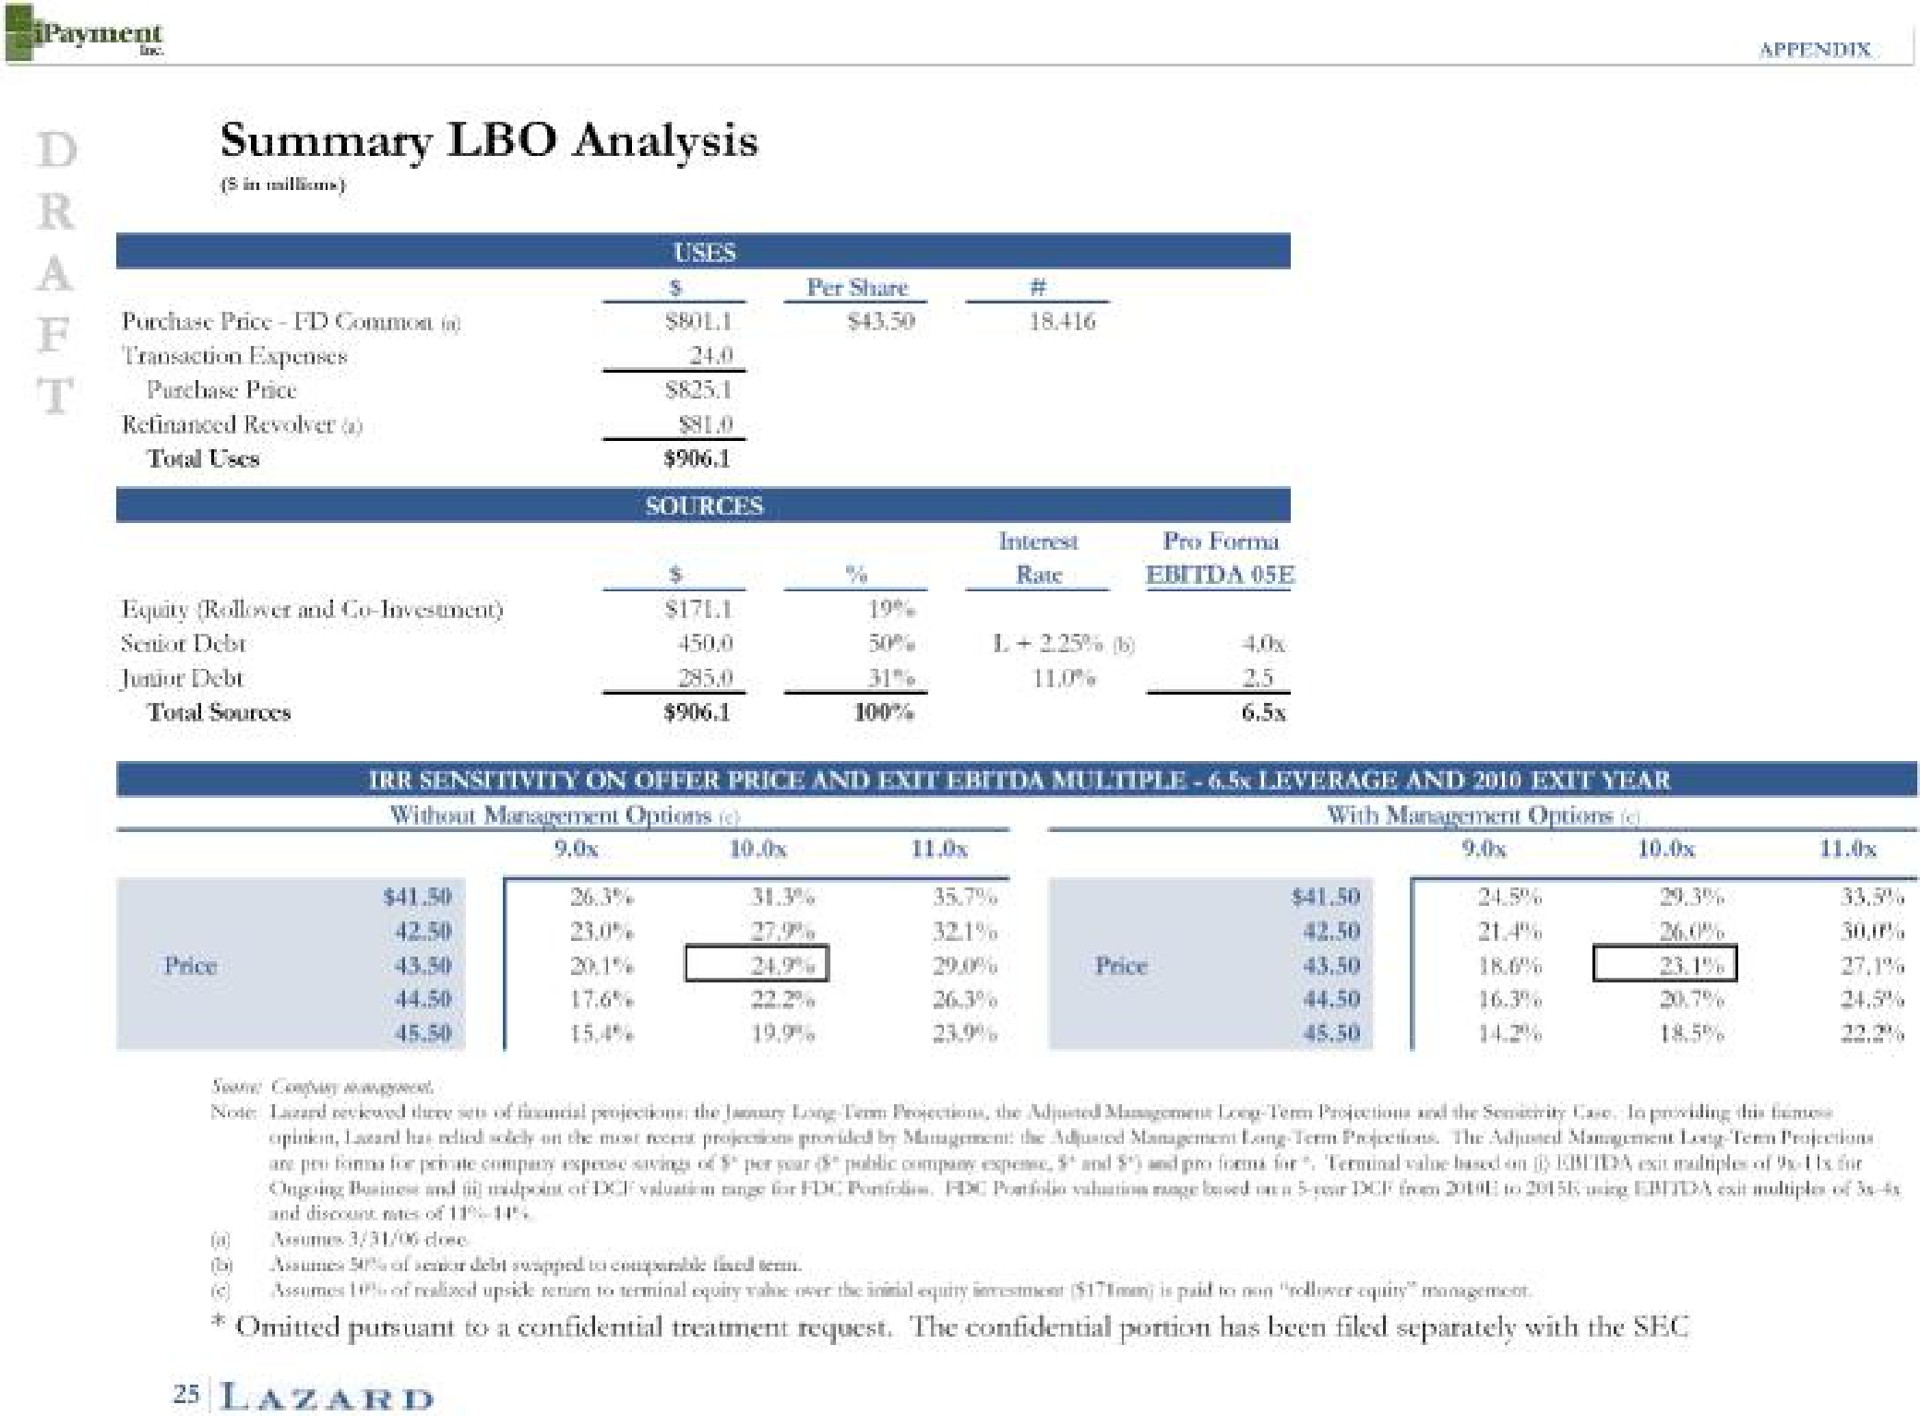 summary analysis on offer price and exit multiple leverage and exit year let cee price | Lazard